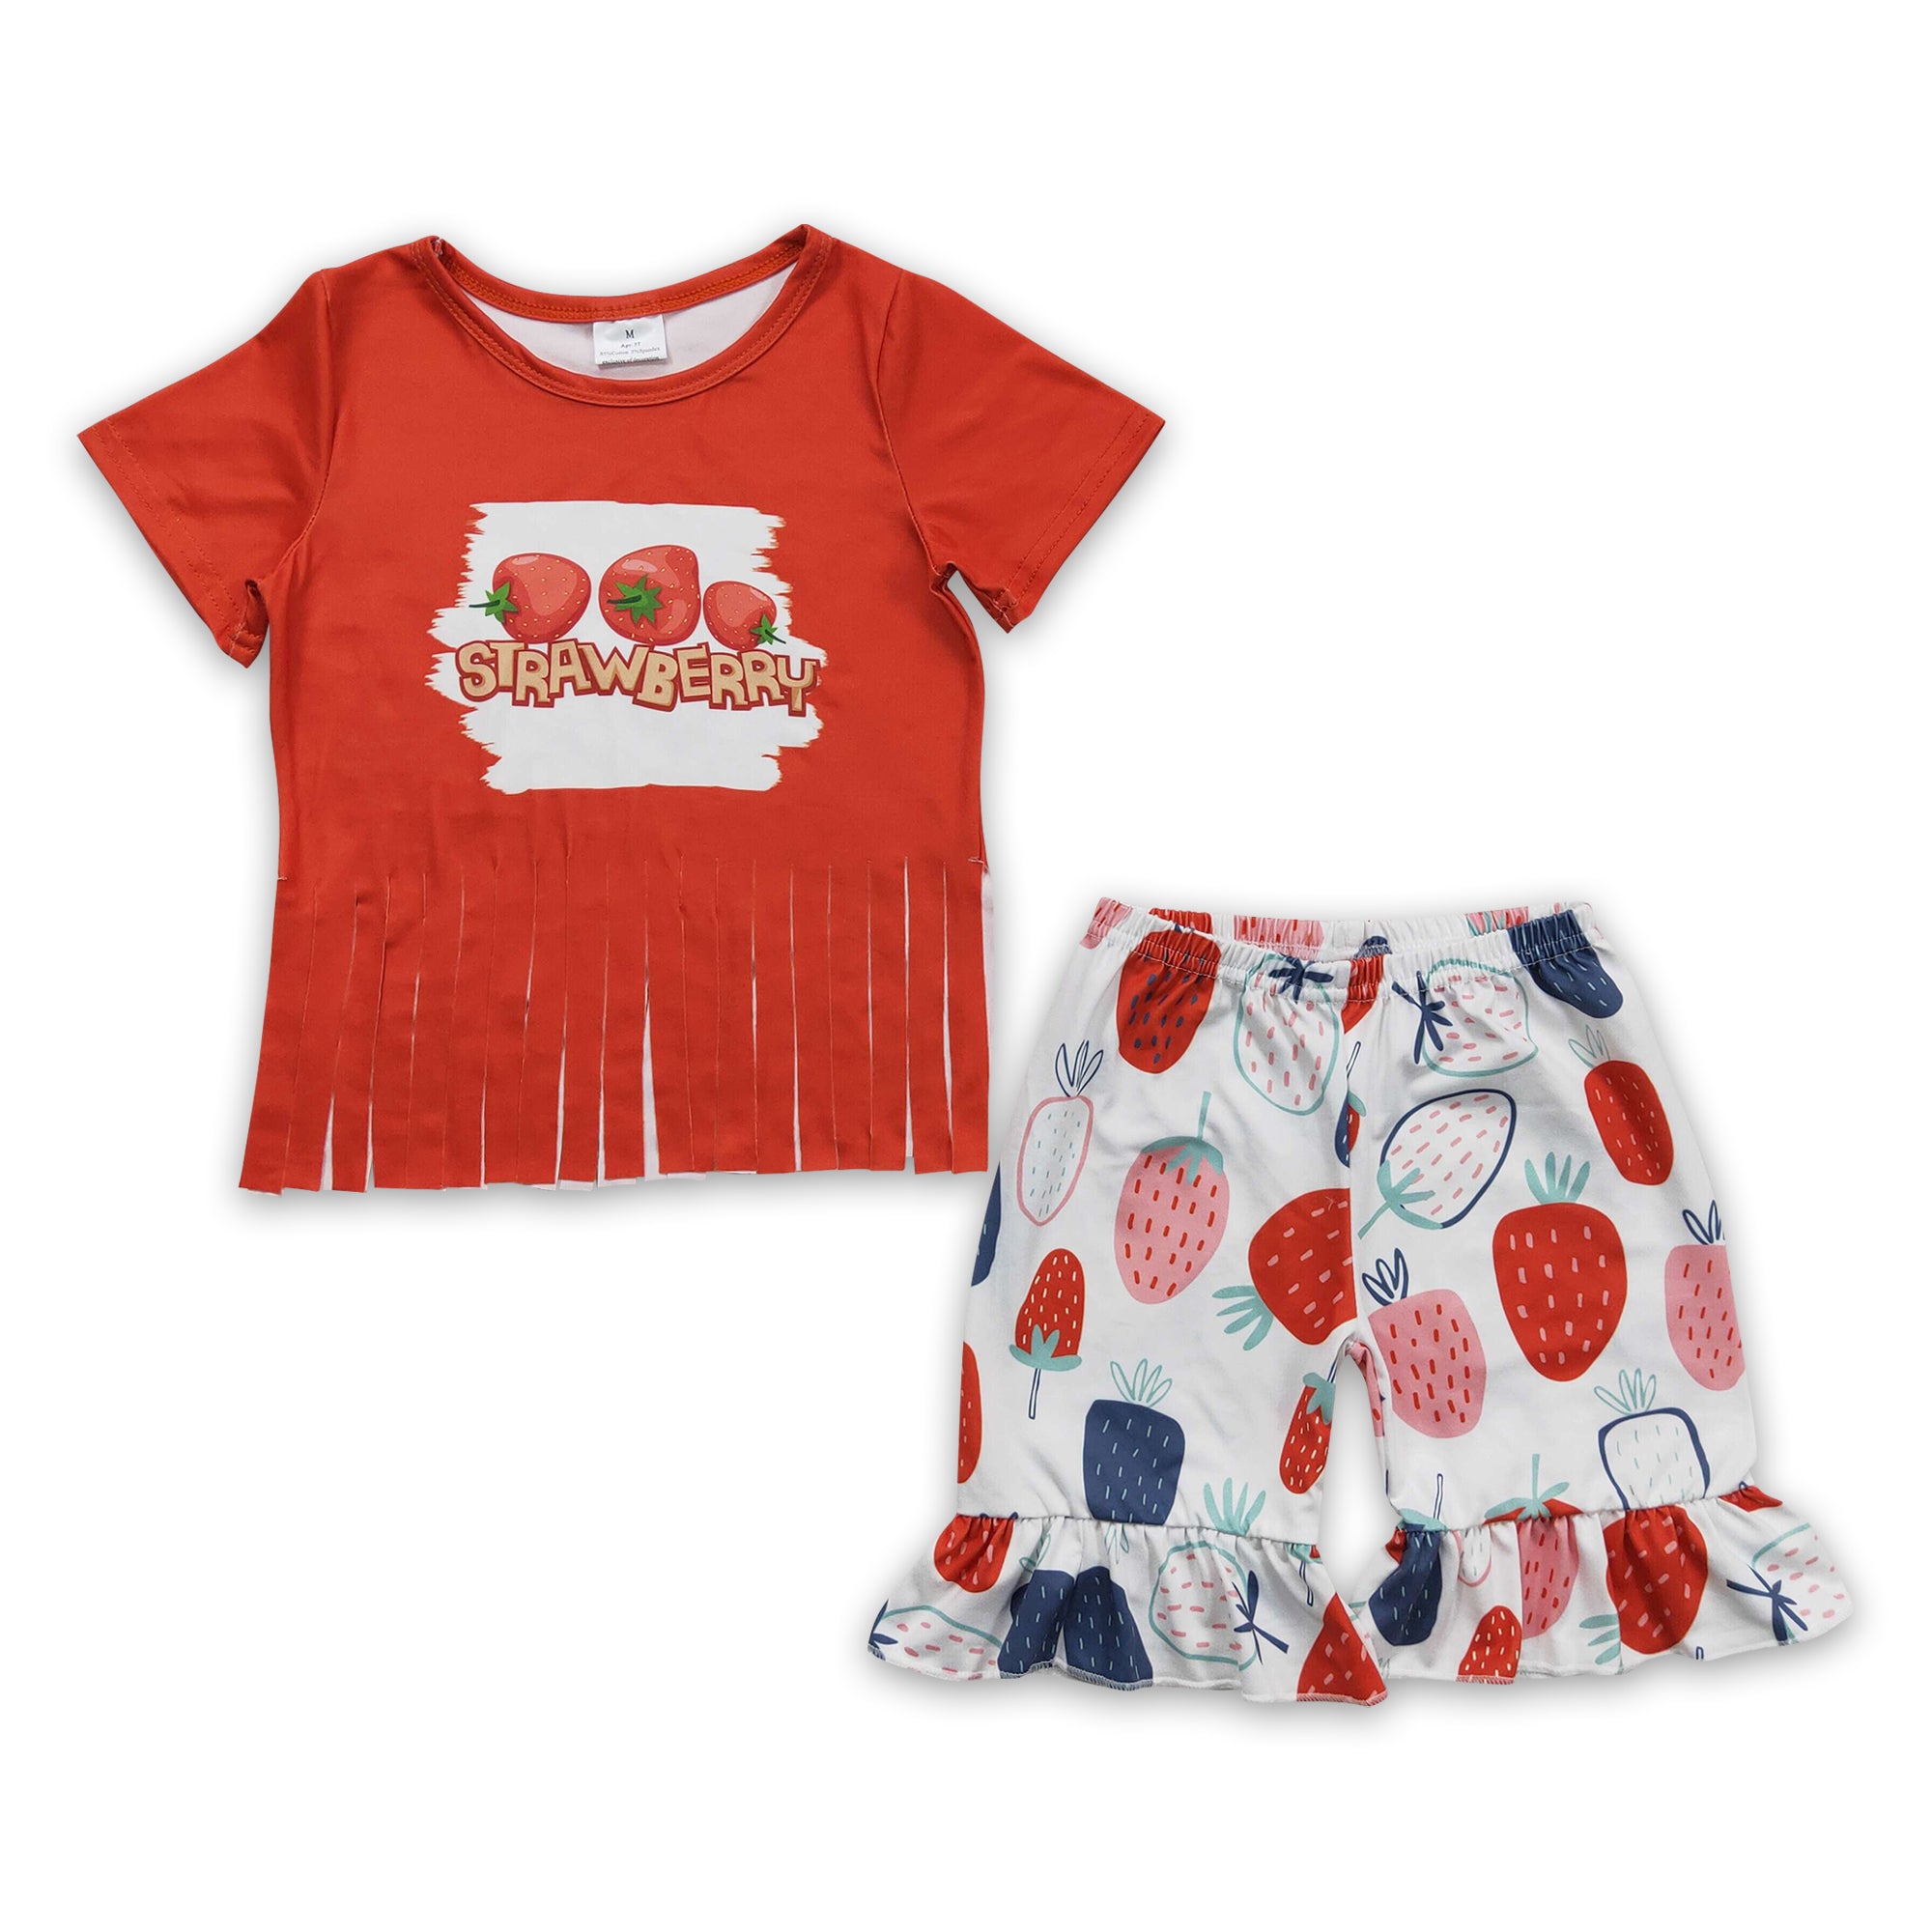 B5-4 promotion baby girl clothes strawberry summer outfits